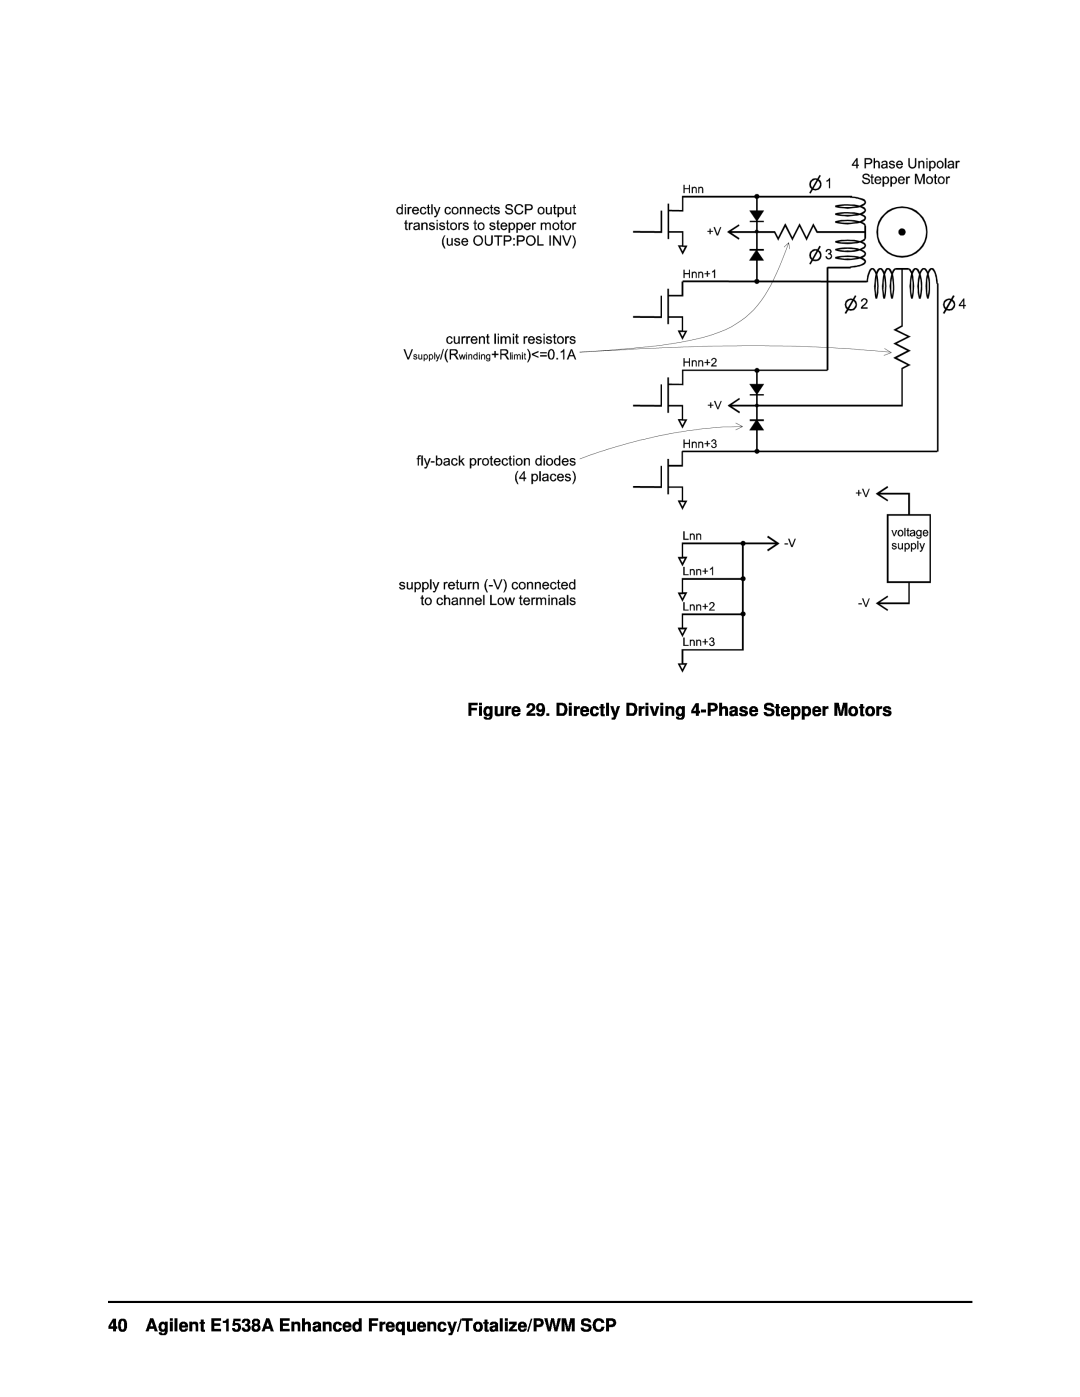 VXI VT1538A user manual Directly Driving 4-Phase Stepper Motors, Agilent E1538A Enhanced Frequency/Totalize/PWM SCP 